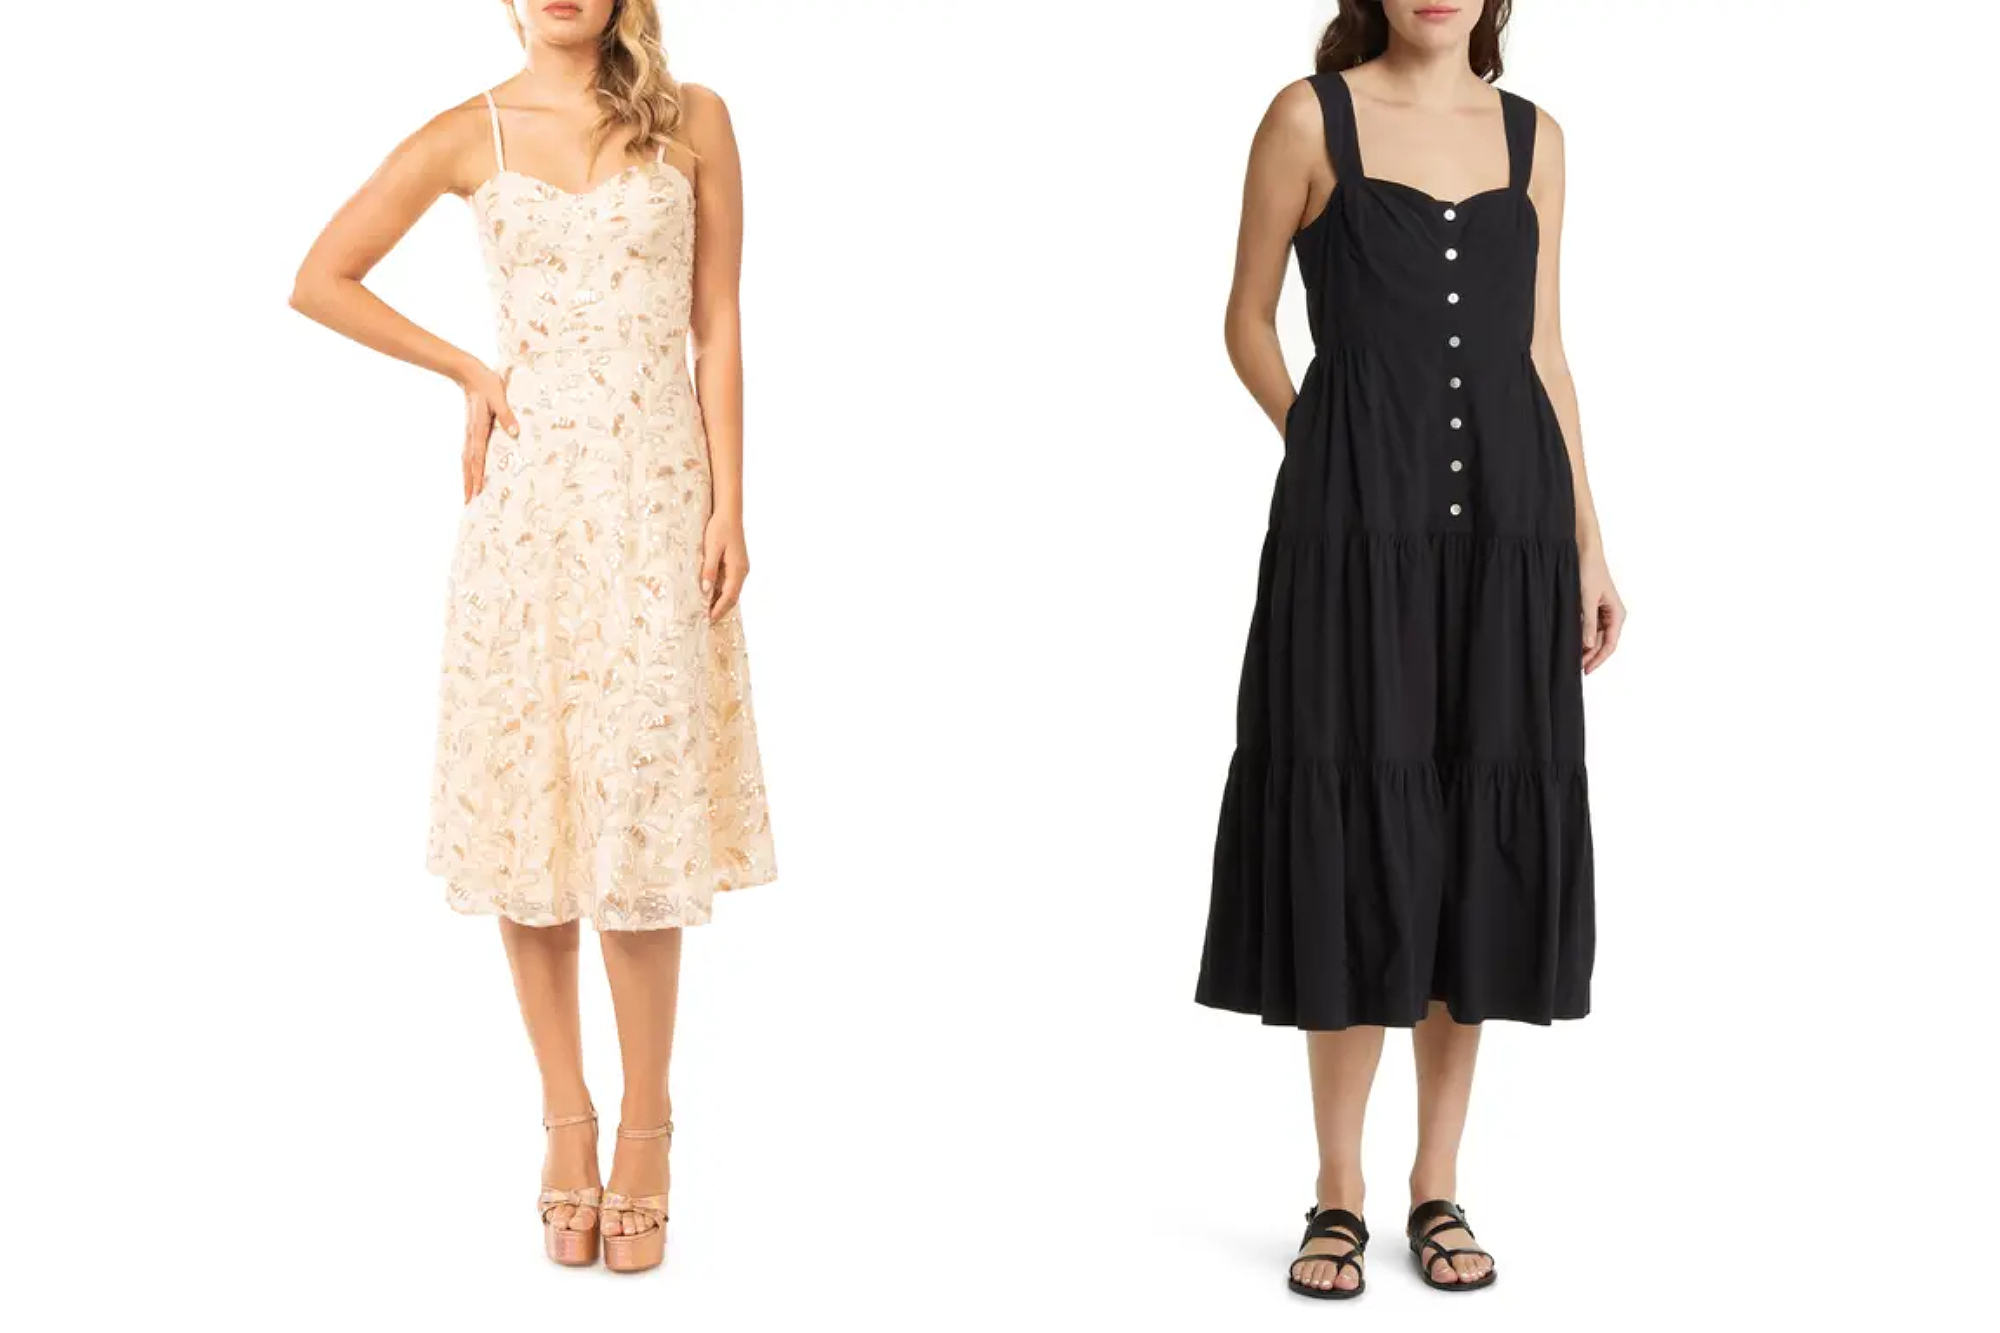 41 $150-or-Less Nordstrom, Zara, and H&M Quiet-Luxury Items